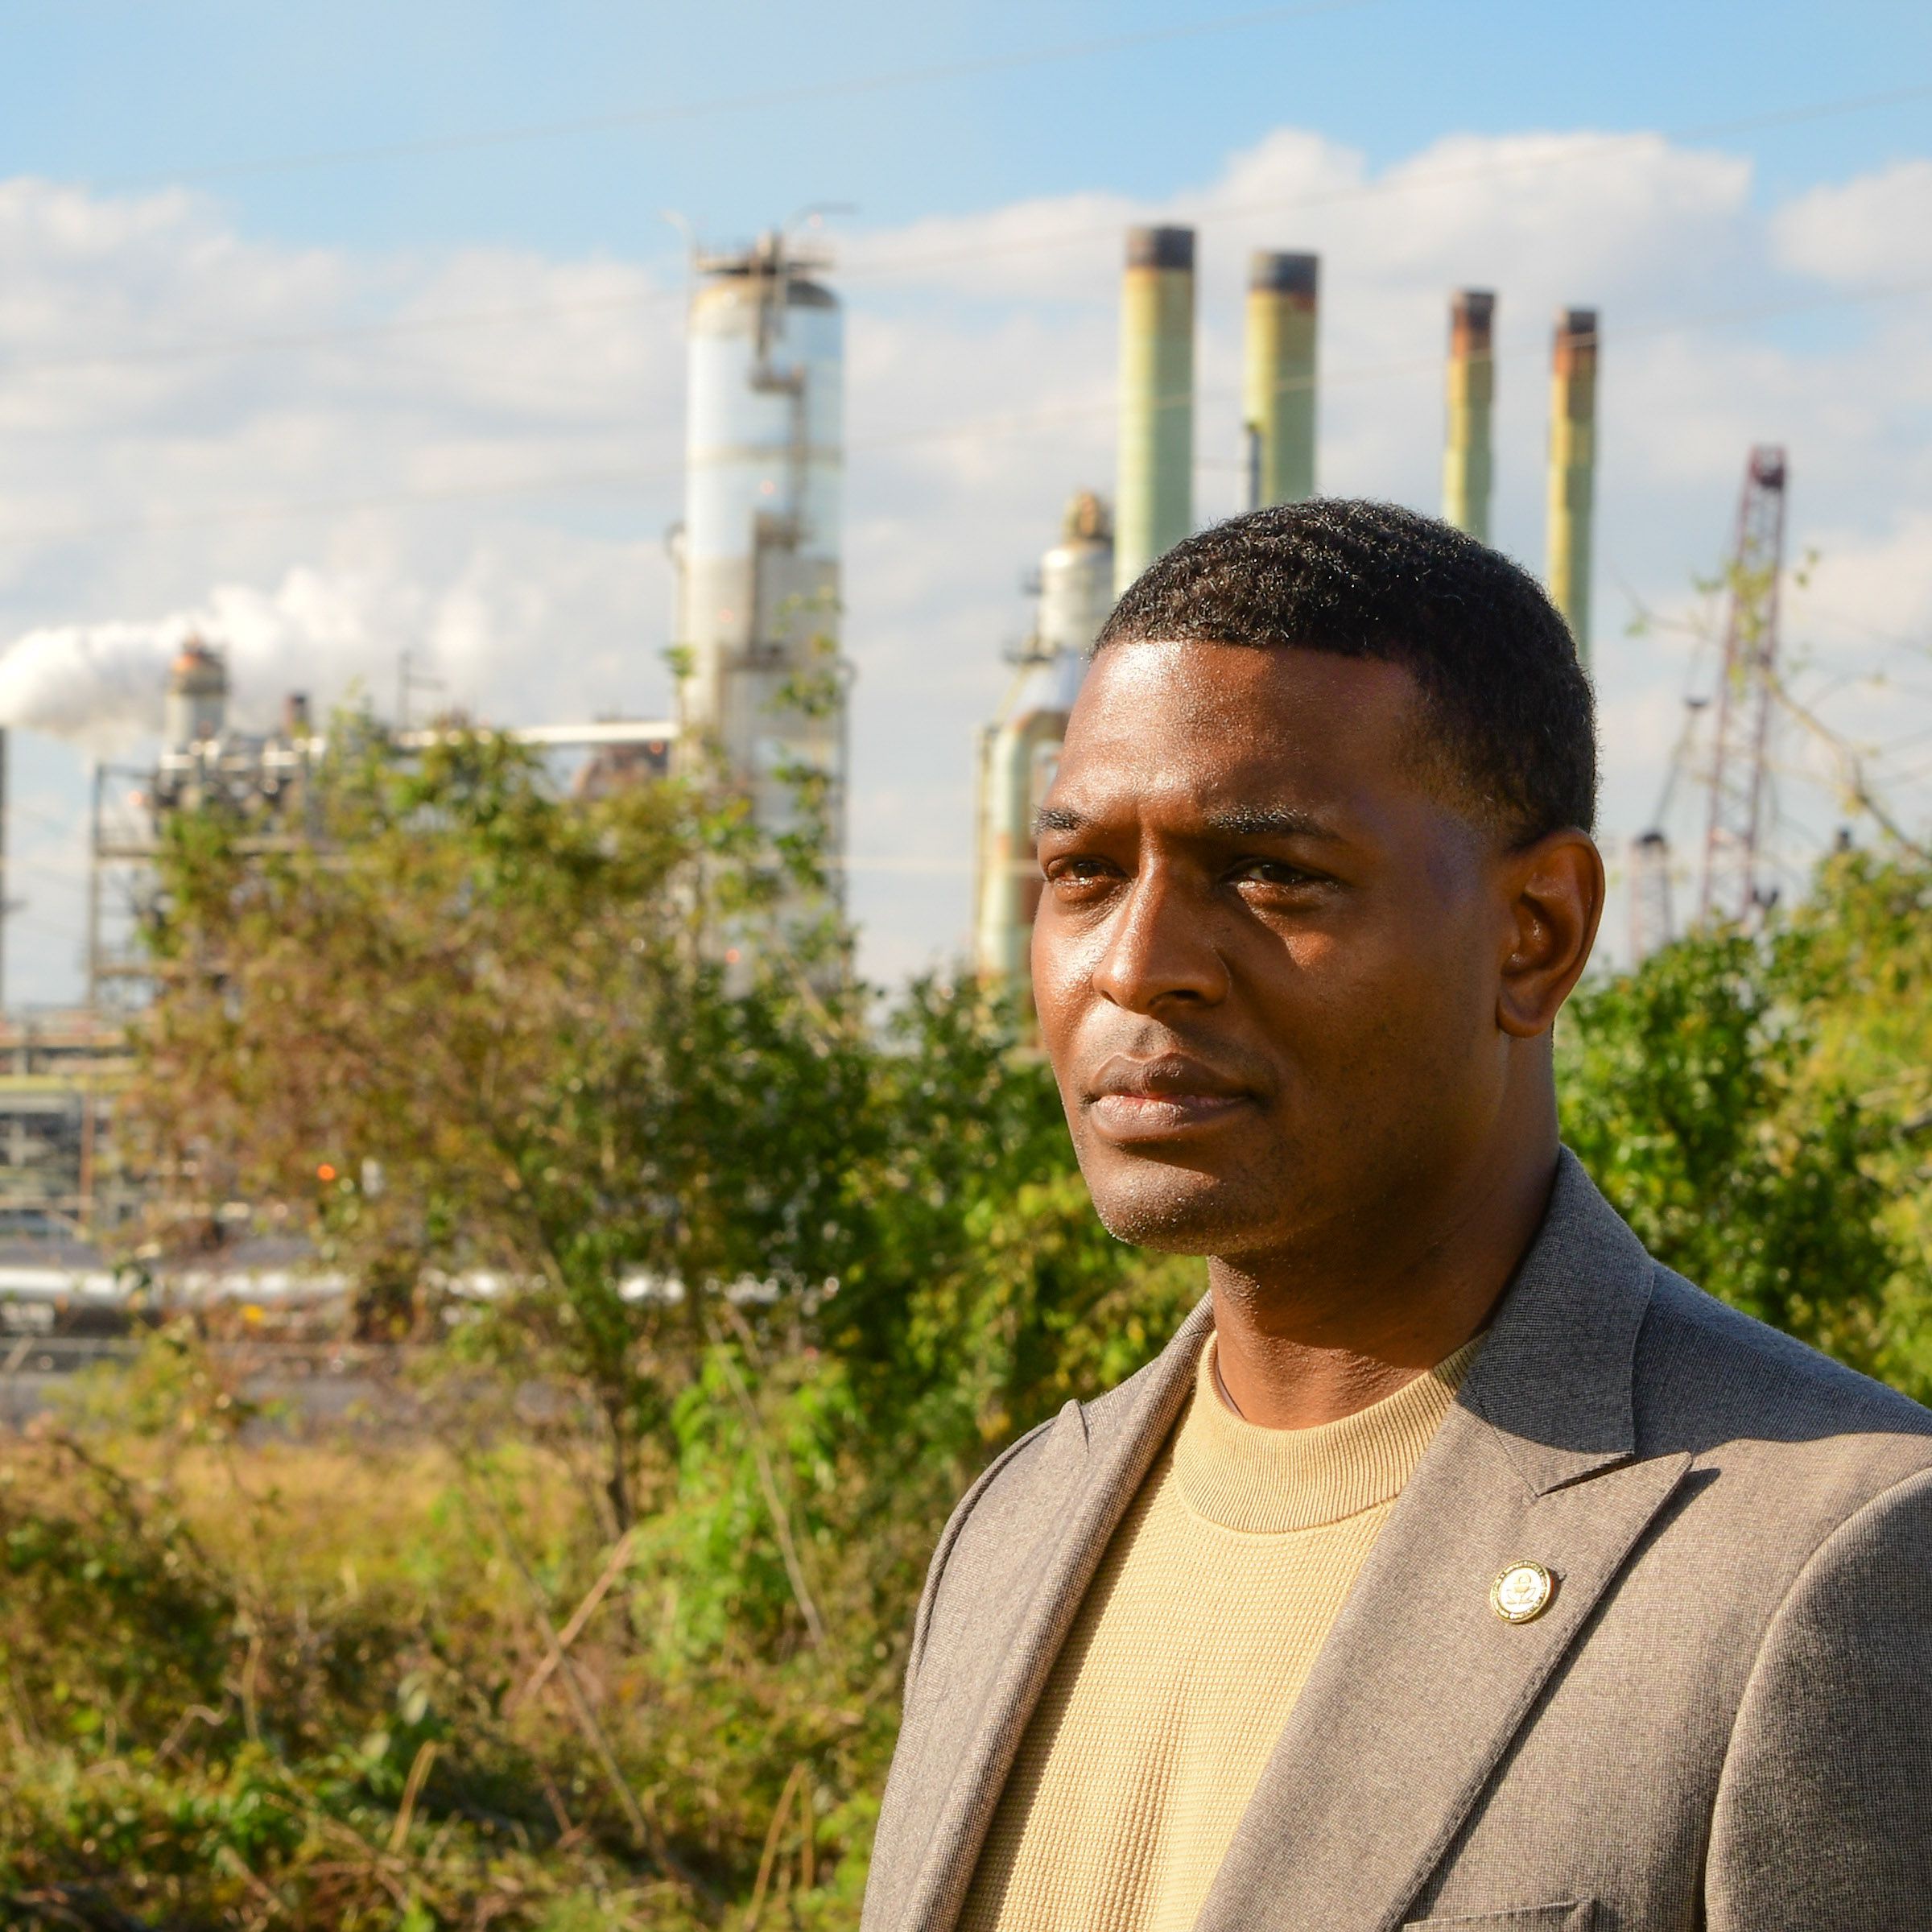 A close-up photo of Michael Regan with an industrial facility that looks like a power plant behind him.